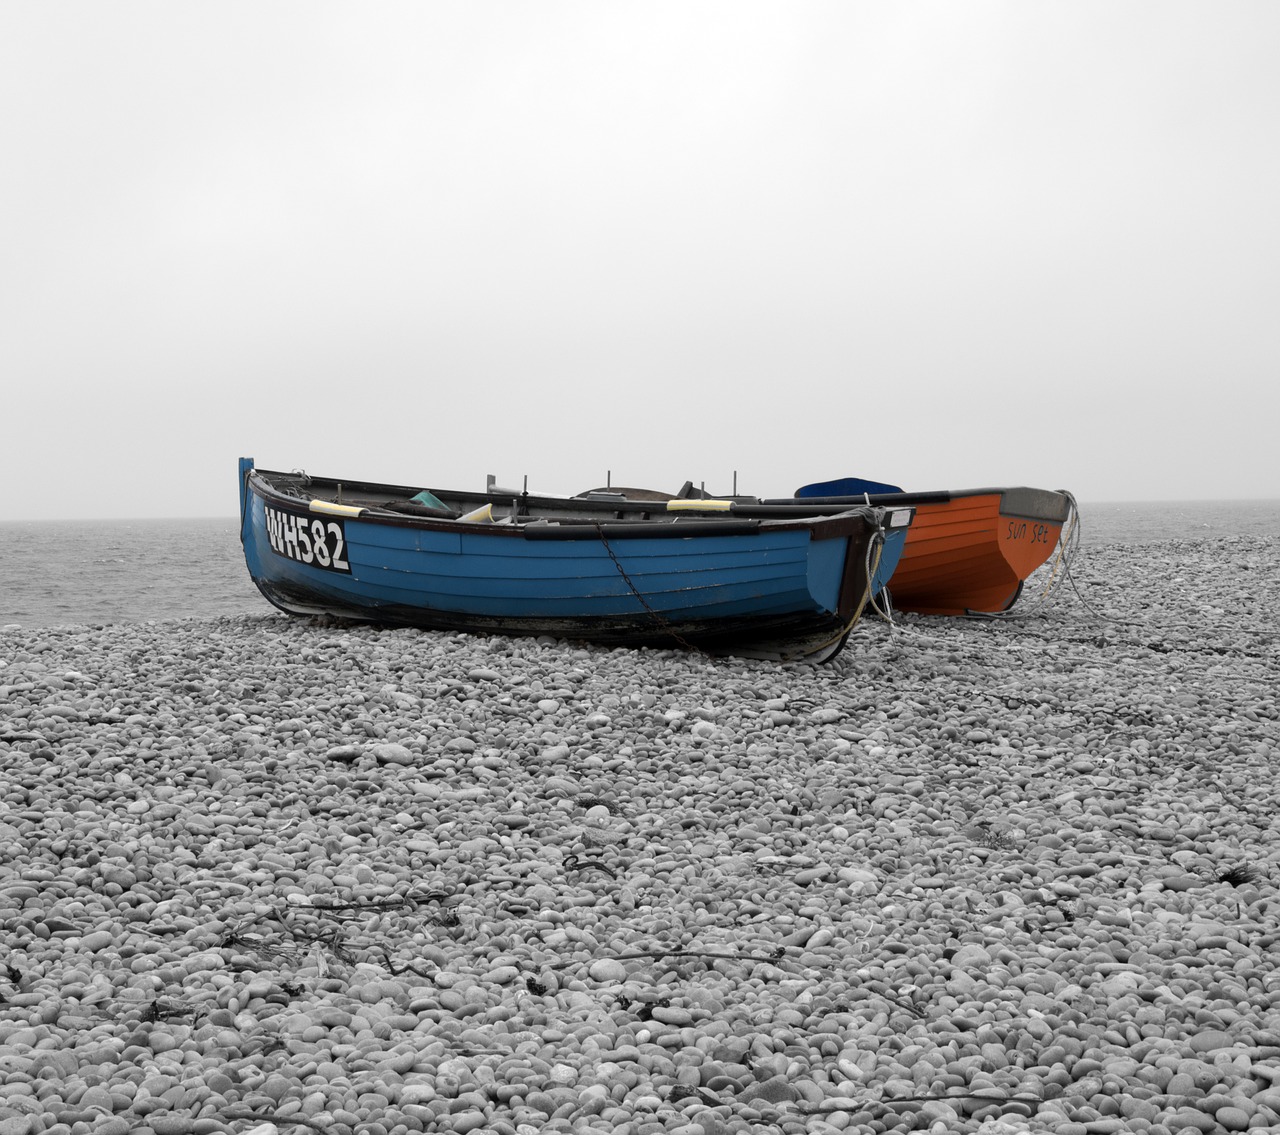 rowing boats chesil beach boat free photo